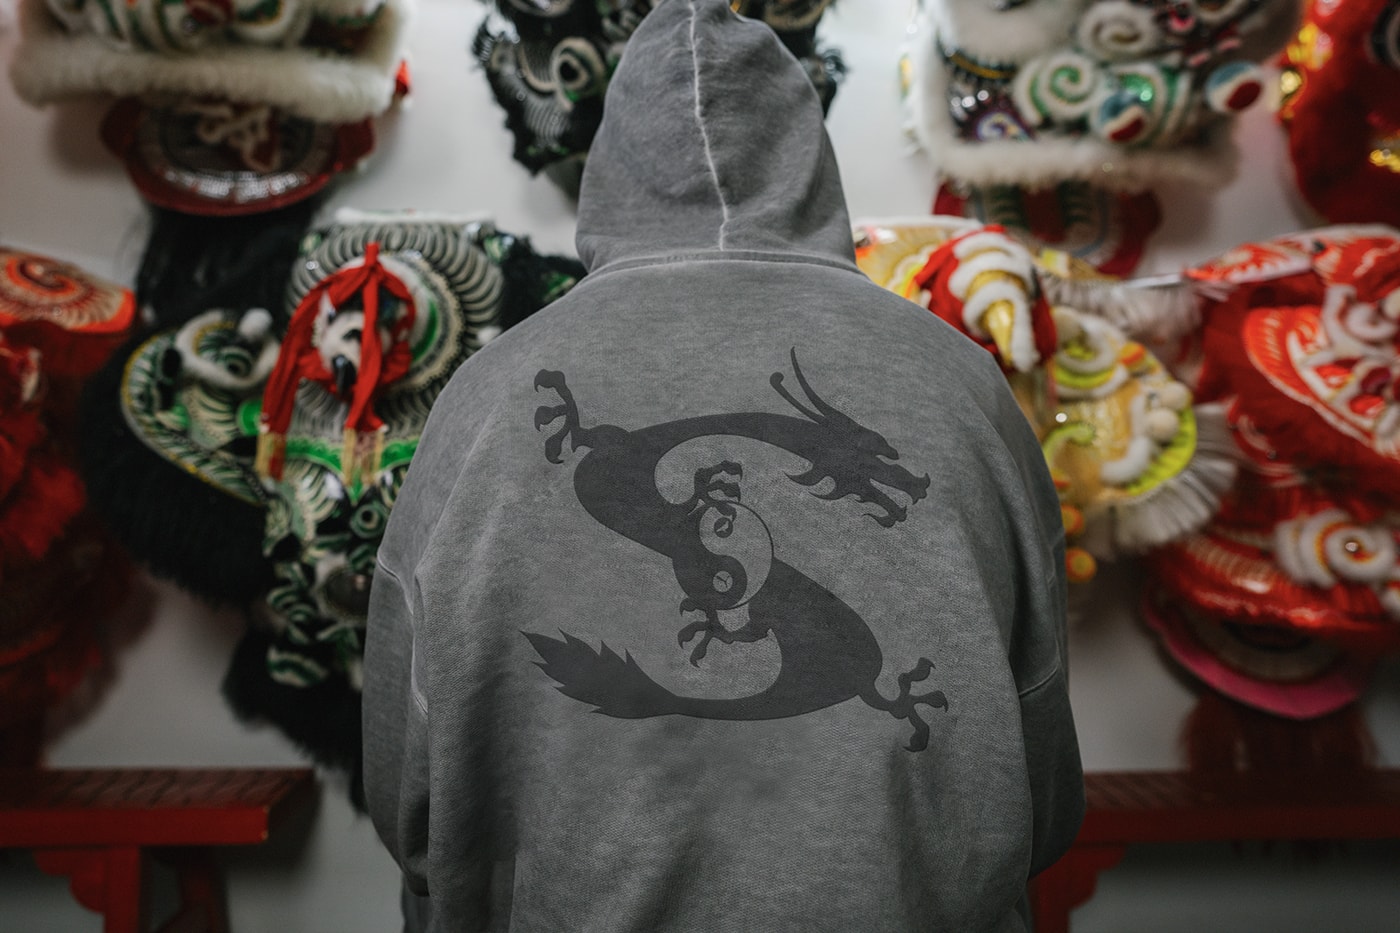 Staple Puma x Staple Washed Hoodie “Year Of The Dragon”